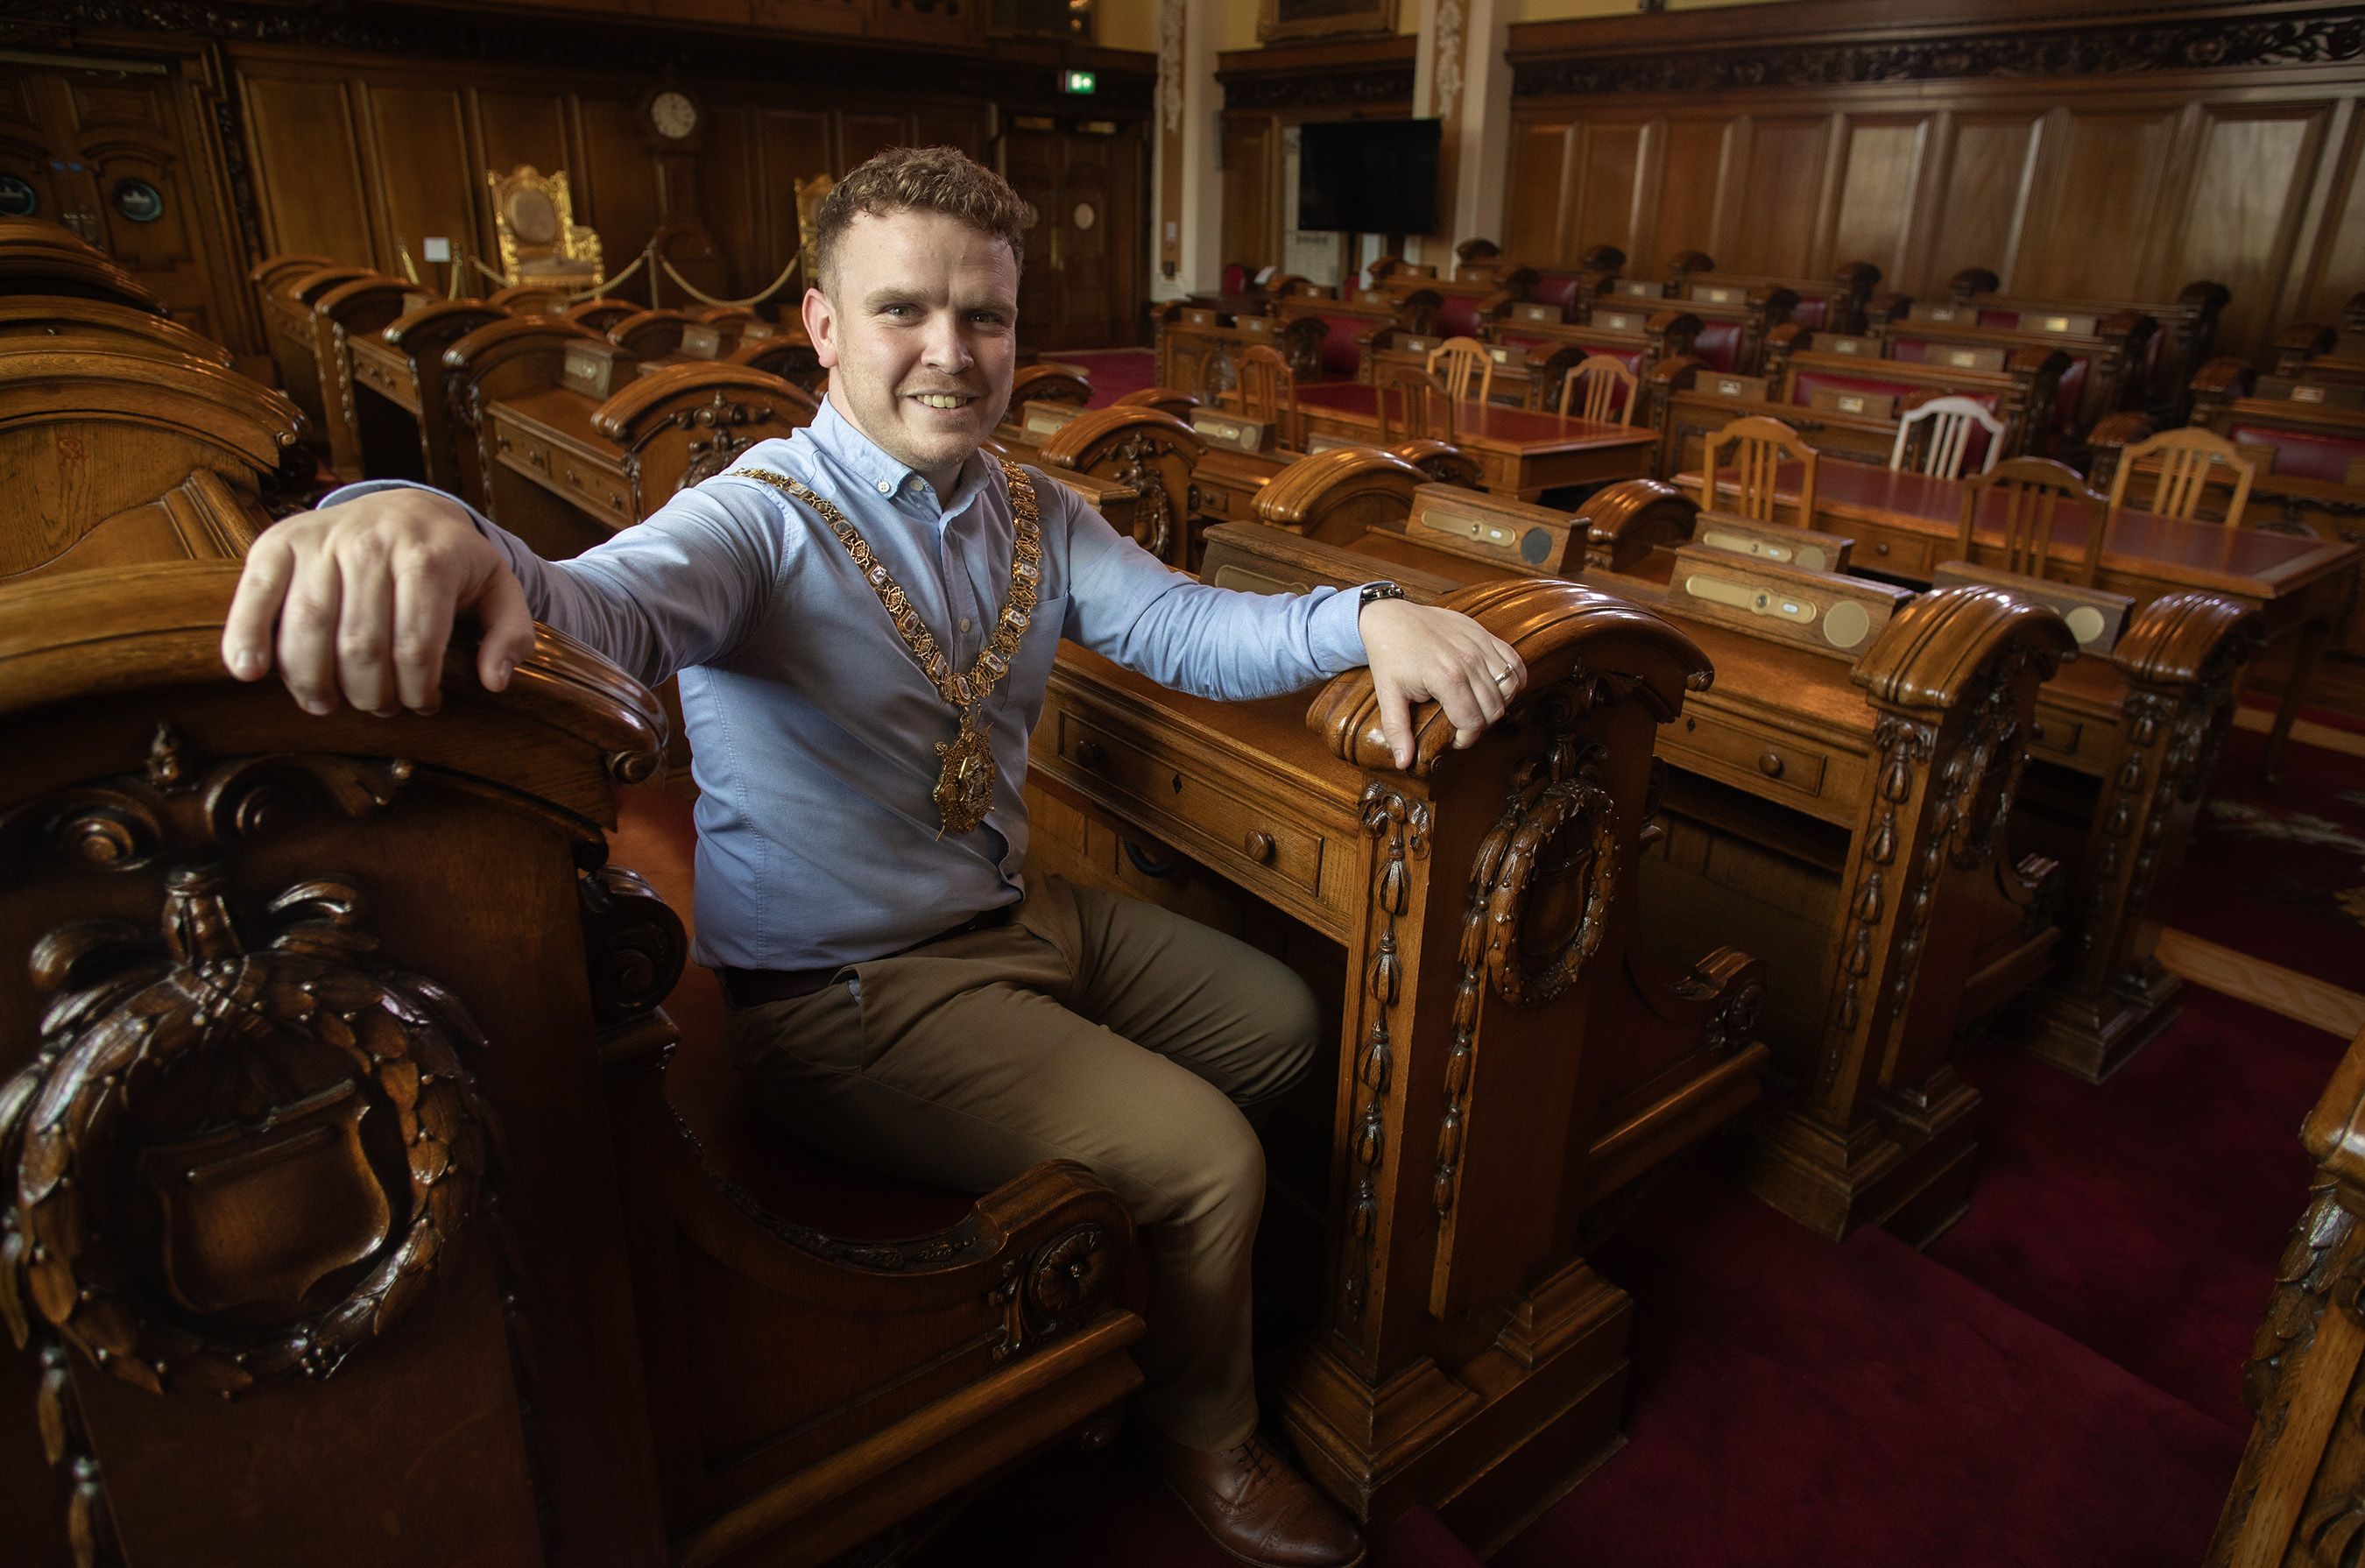 YEAR IN OFFICE: Outgoing Lord Mayor Ryan Murphy has enjoyed his term in office